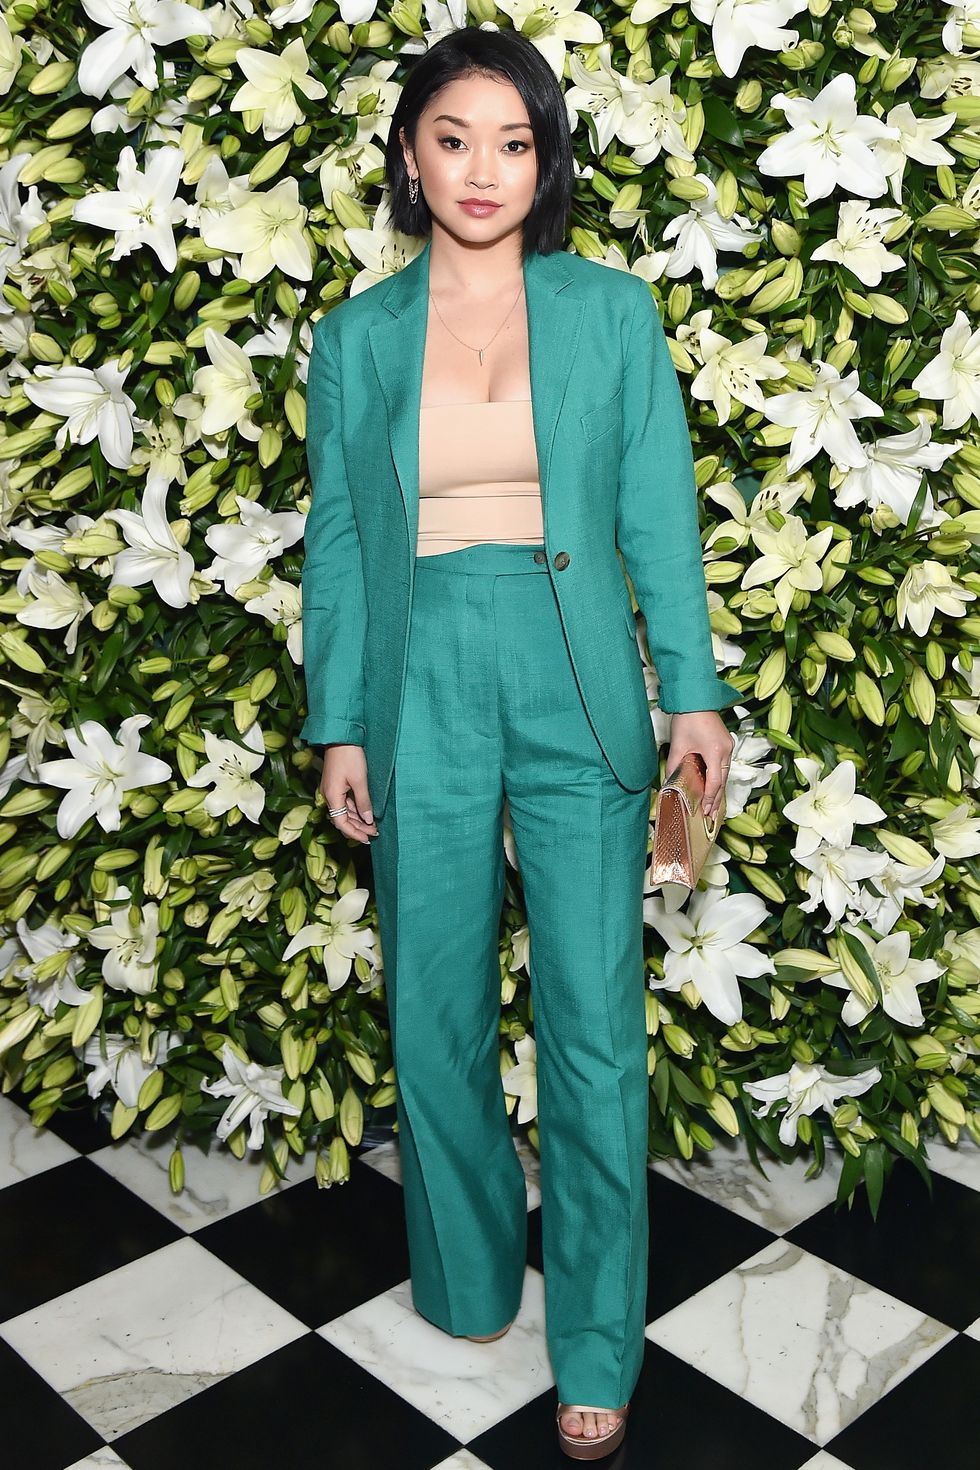 2019 WSJ. Magazine Talents and Legends Dinner Honoring Lucas Hedges